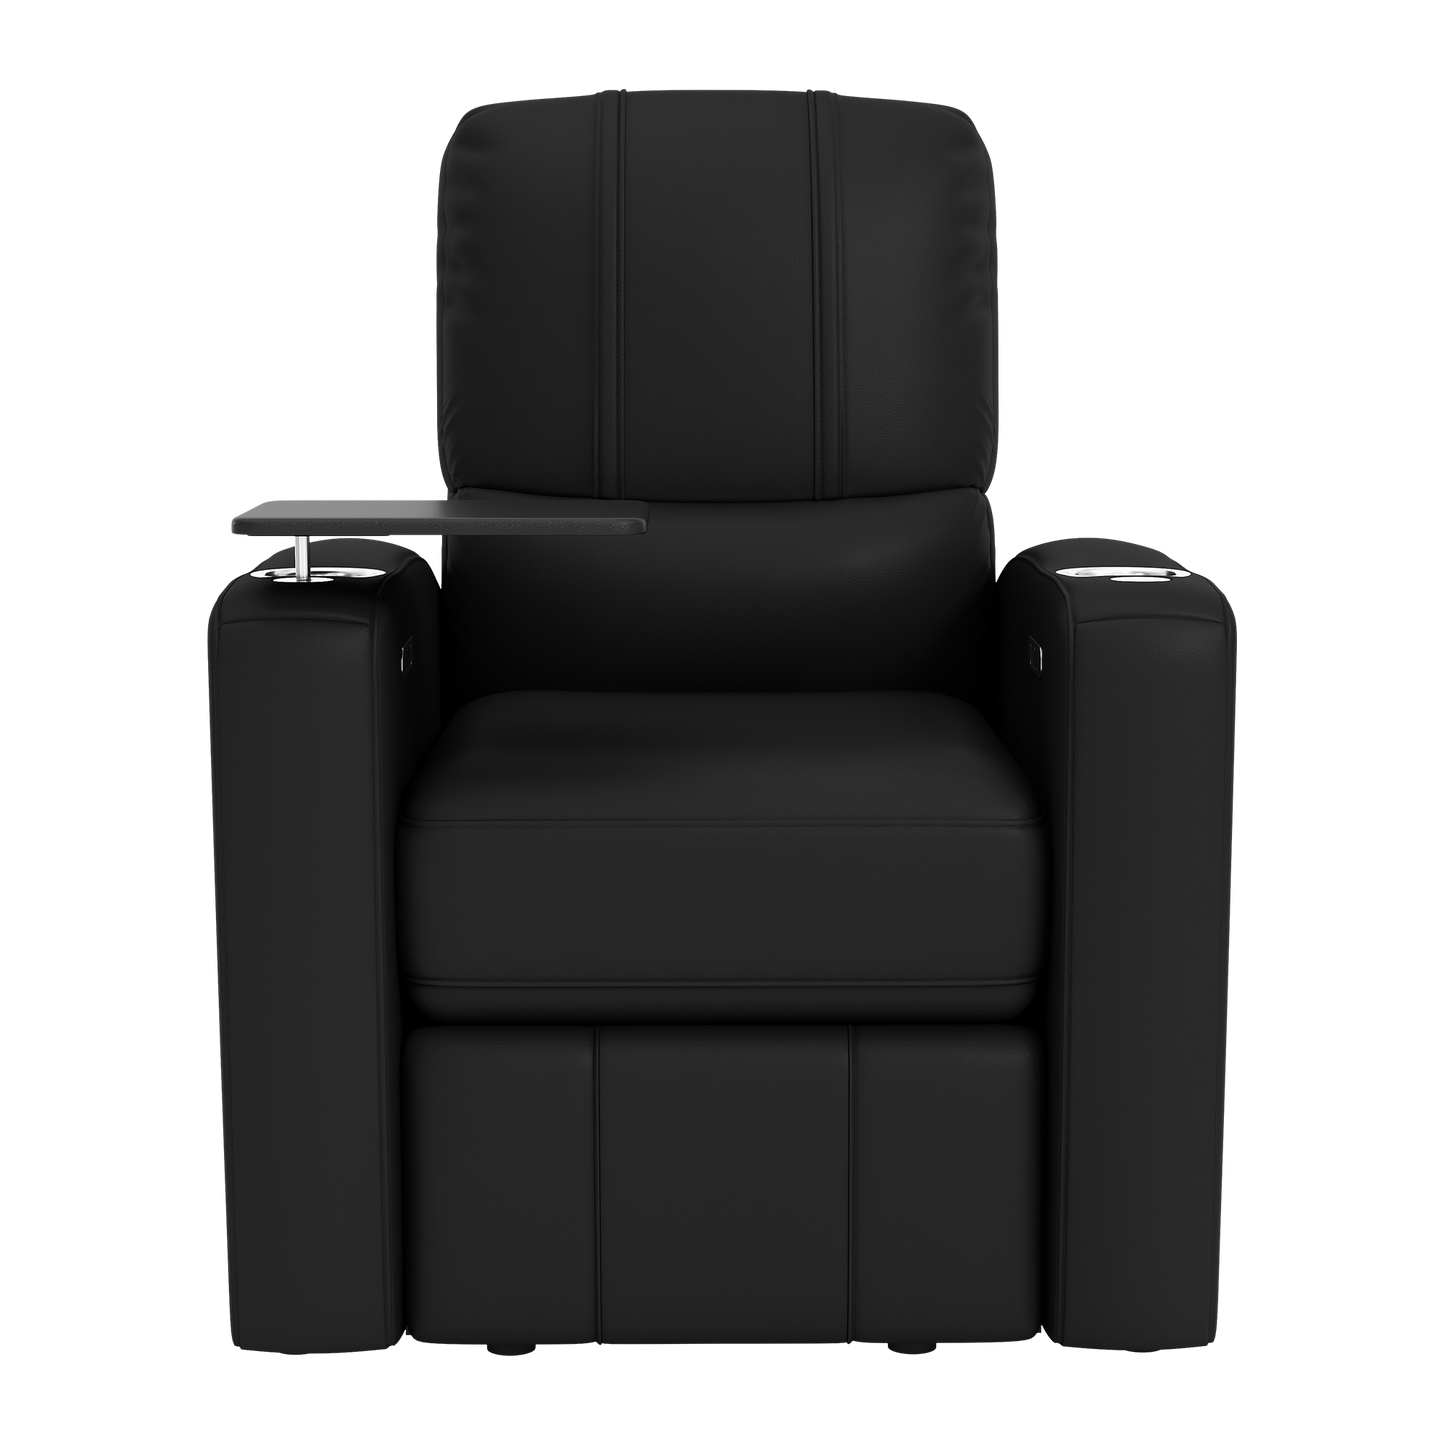 Stealth Power Plus Recliner with Houston Astros Secondary